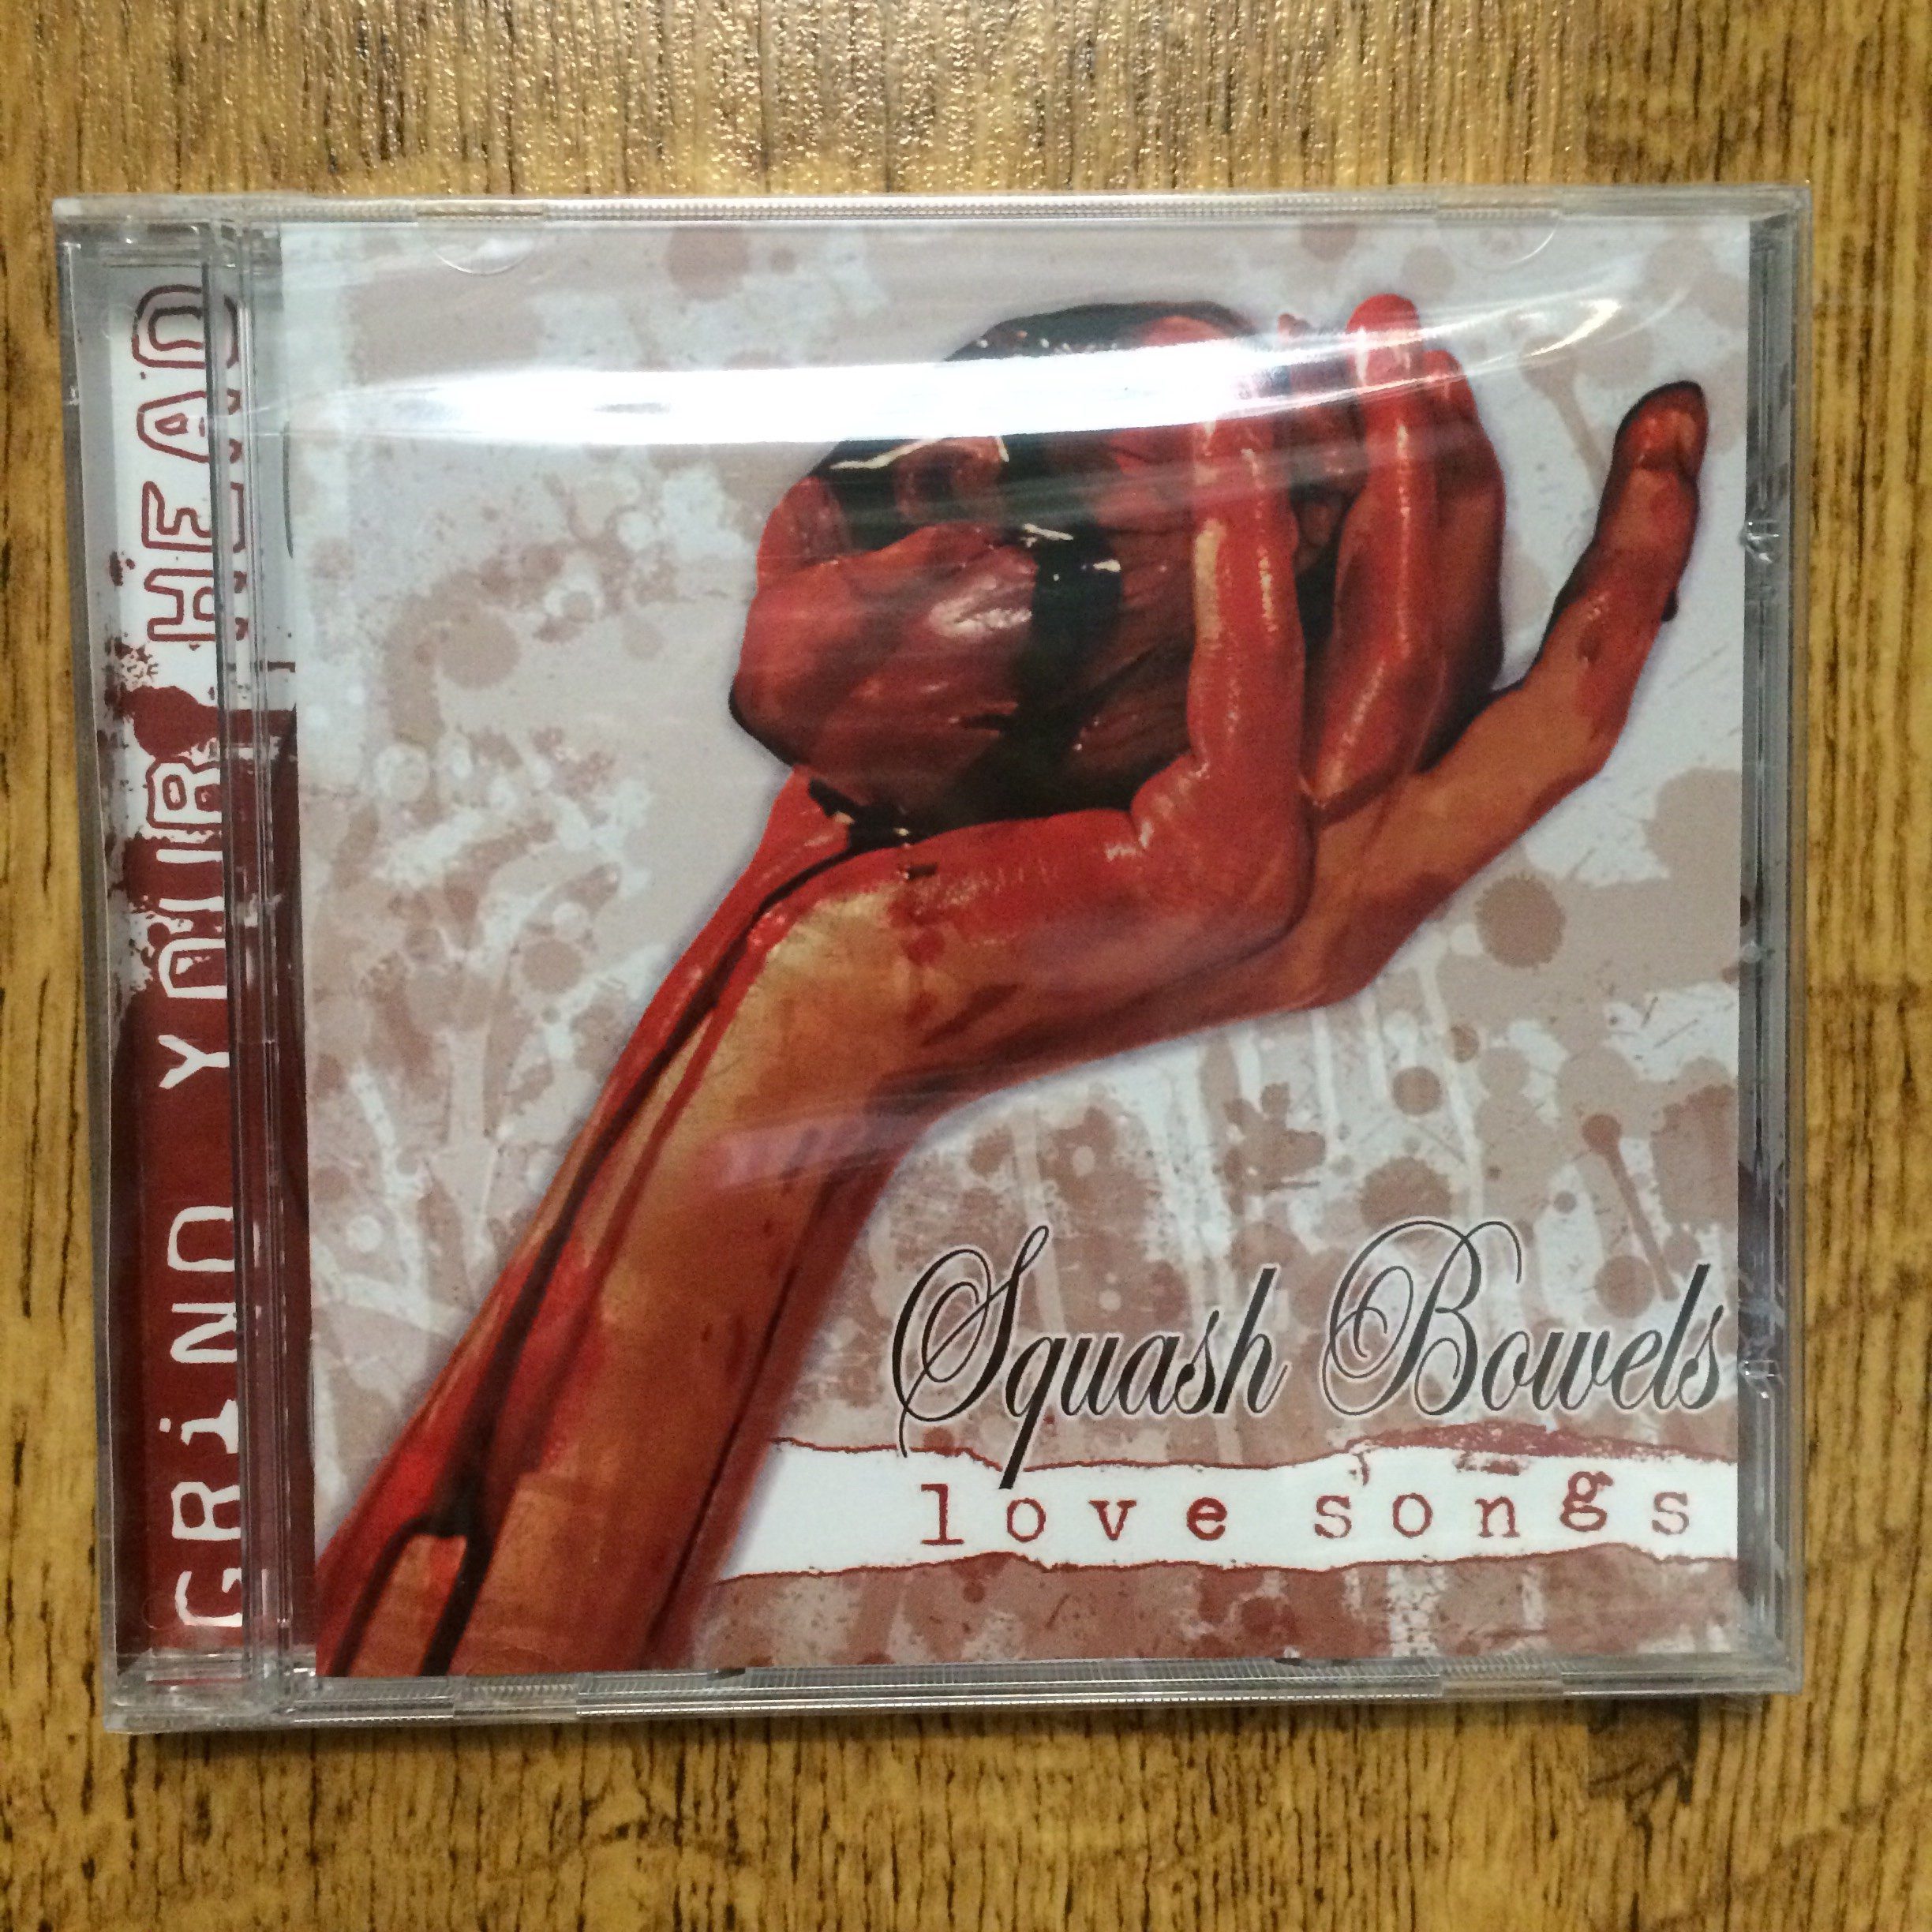 Photo of the Squash Bowels - "Love Songs" CD